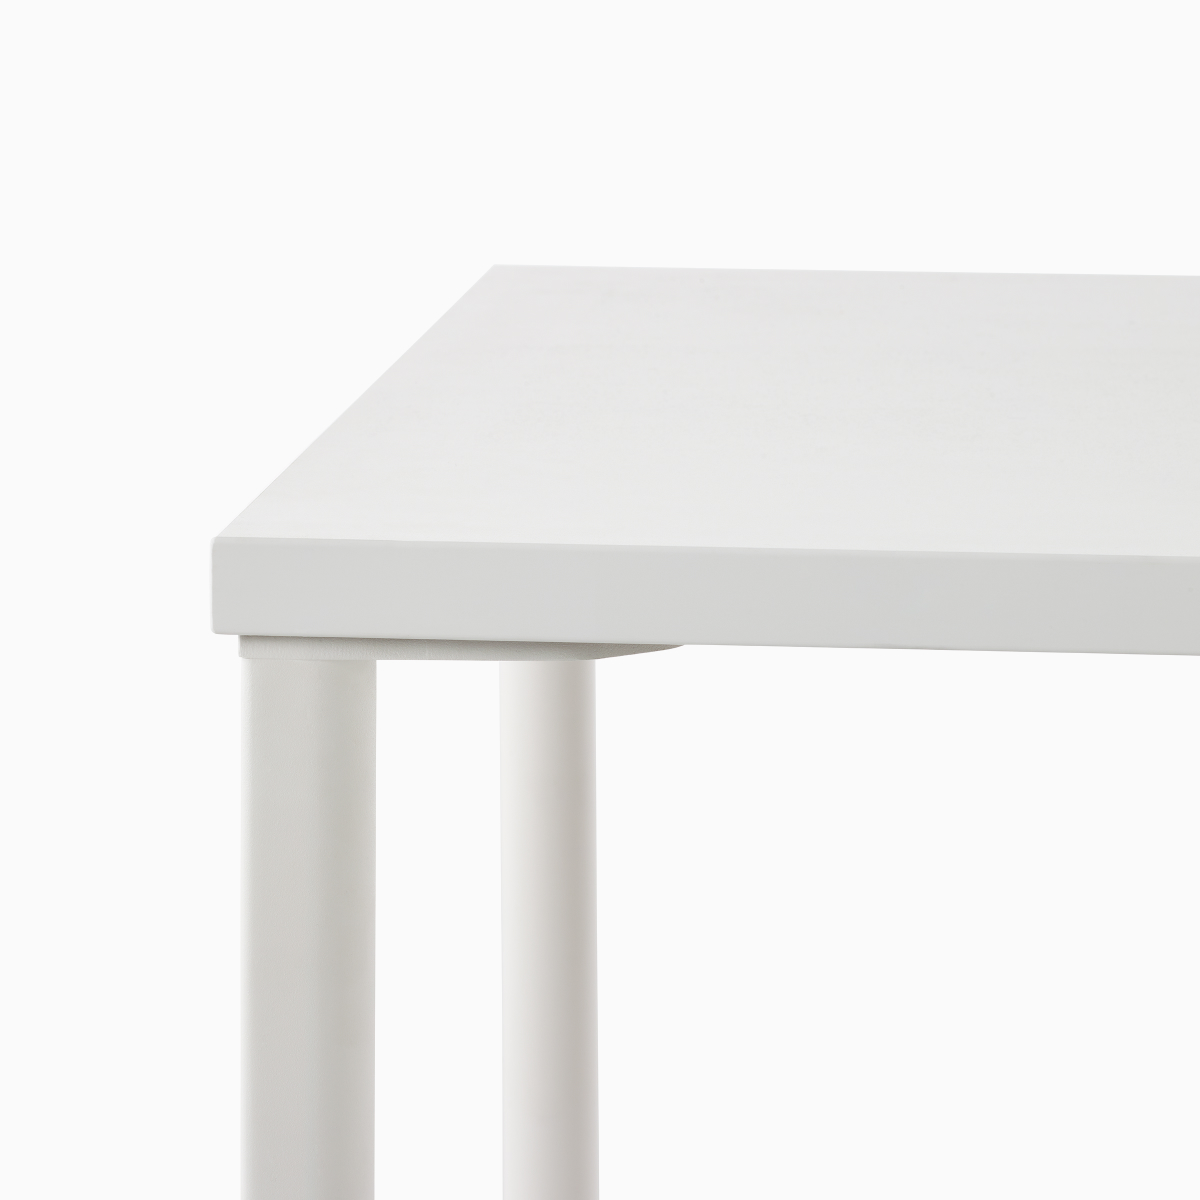 Close-up of the OE1 Rectangular Table leg detail with white surface and white legs.